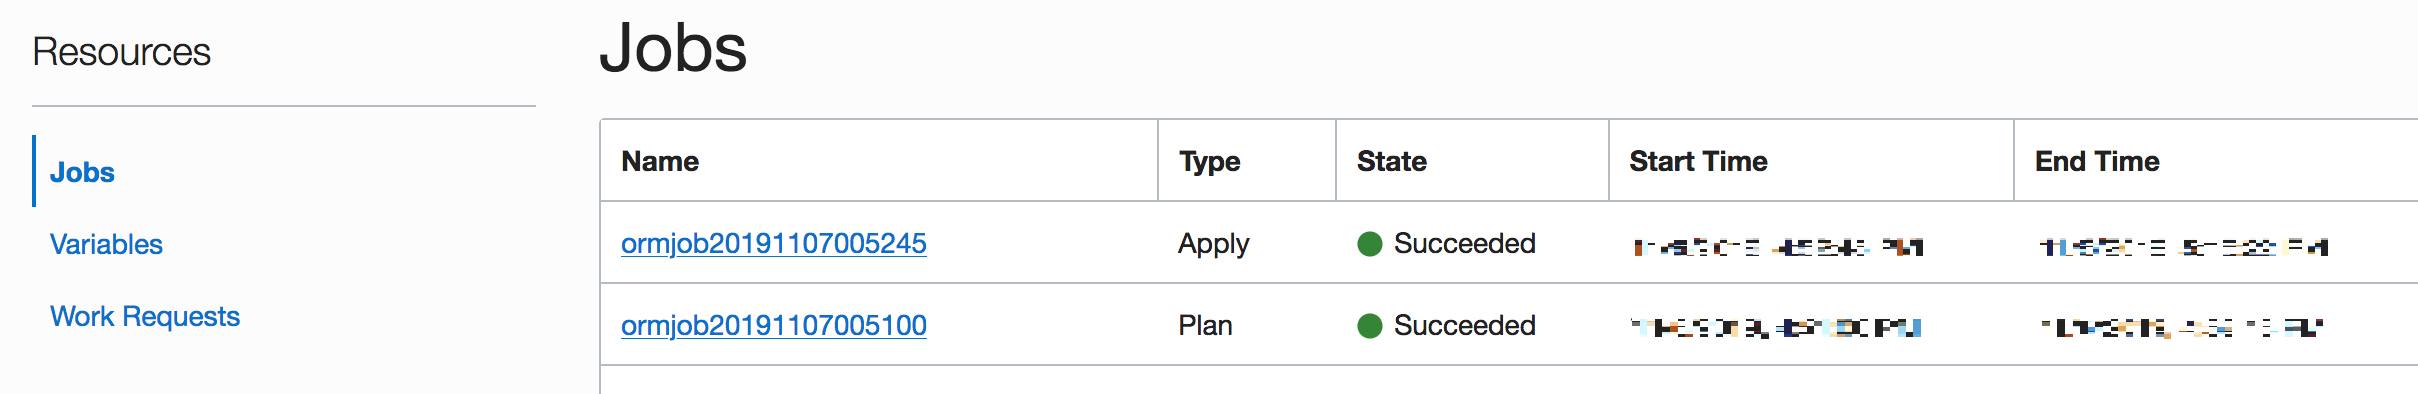 Stack creation can be viewed by selecting the specific apply job 